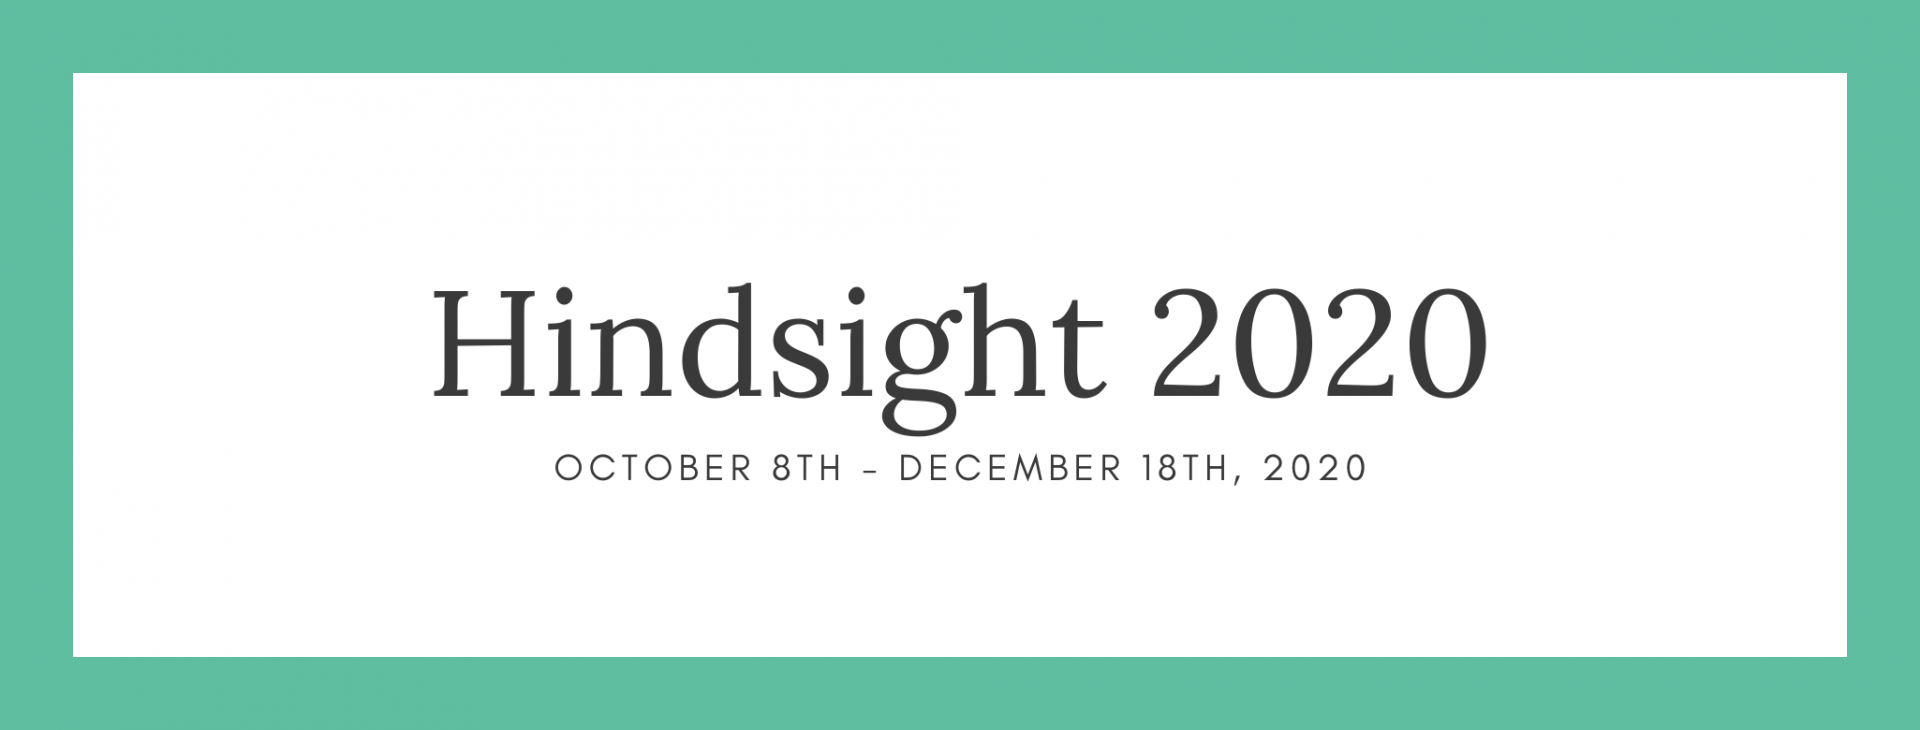 Call for submissions! Hindsight 2020